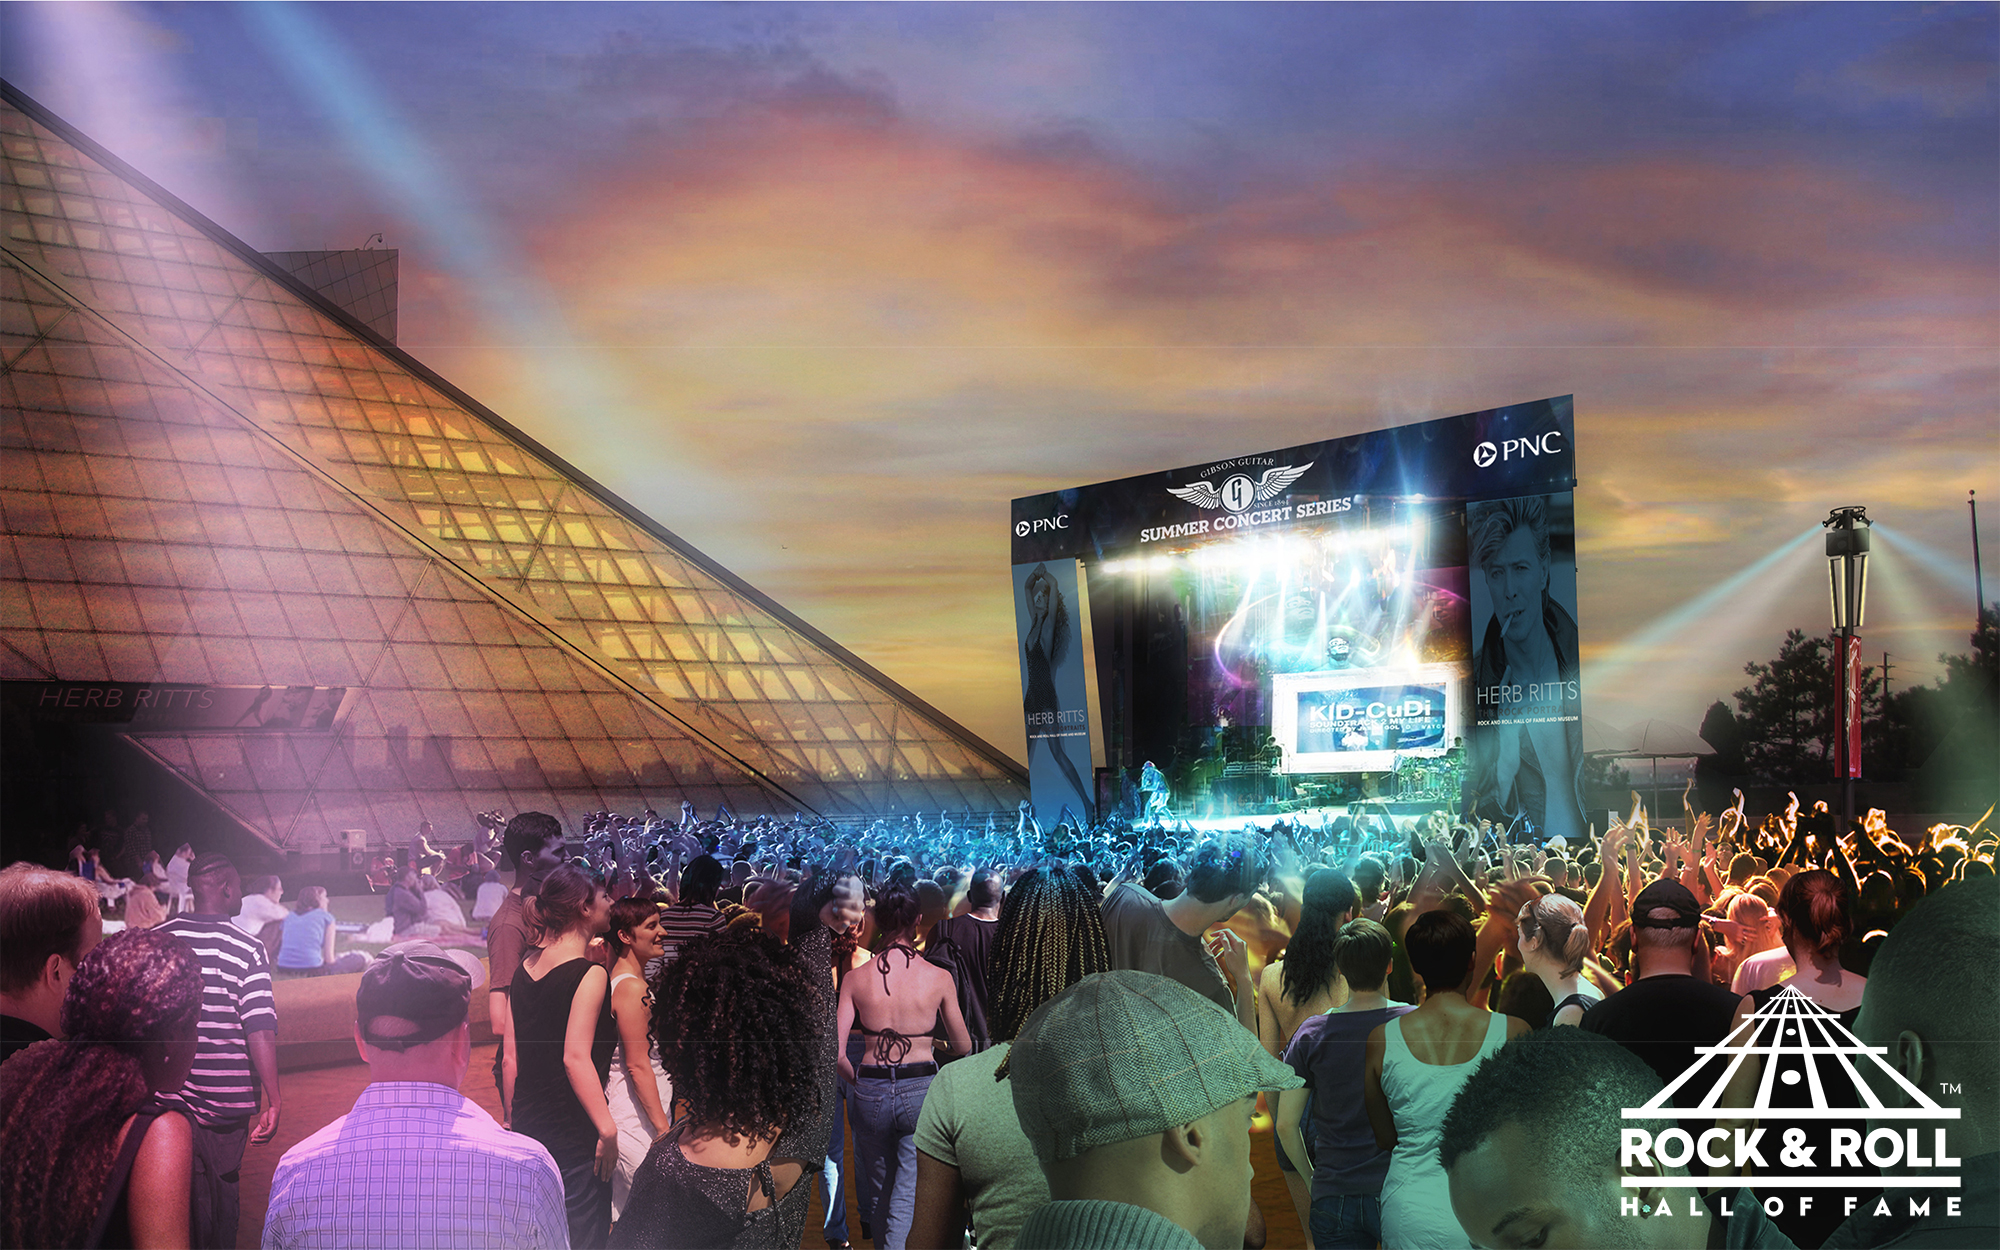 PHOTOS Rock and Roll Hall of Fame's revamped entrance plaza gets